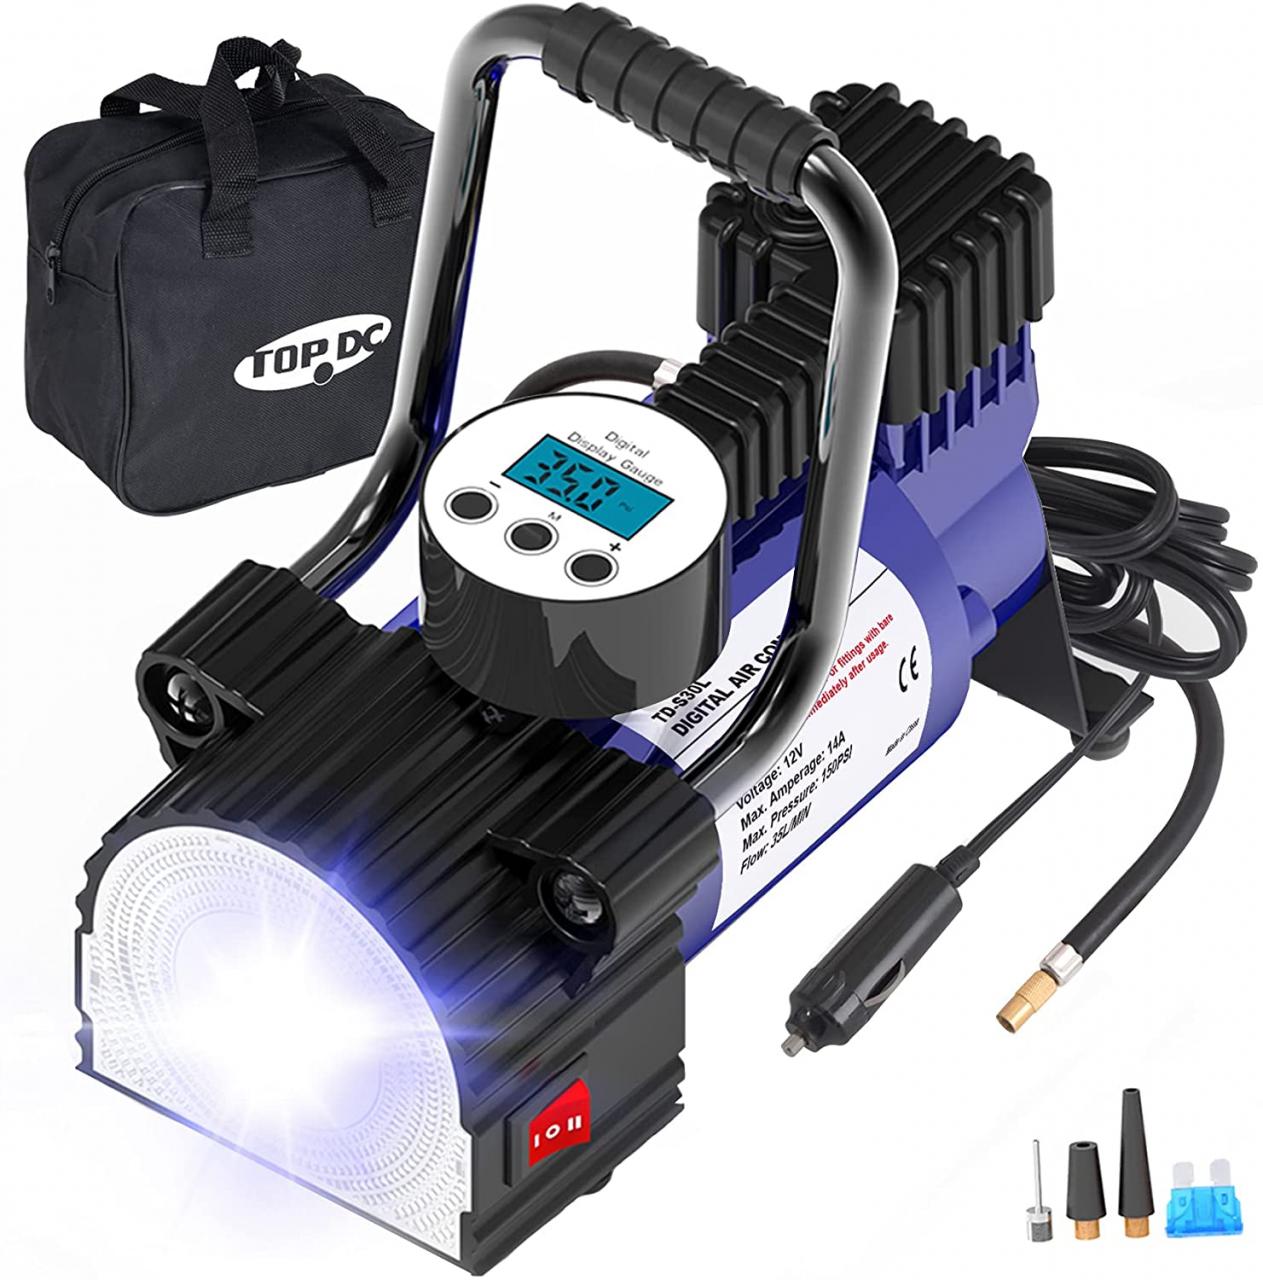 Buy TOPDC Air Compressor Tire Inflator, 12V DC Digital Tire Inflator with  LED Light for Car, Bicycle, Motorcycle, Basketball and Other Online in  Vietnam. B0834LLXDK